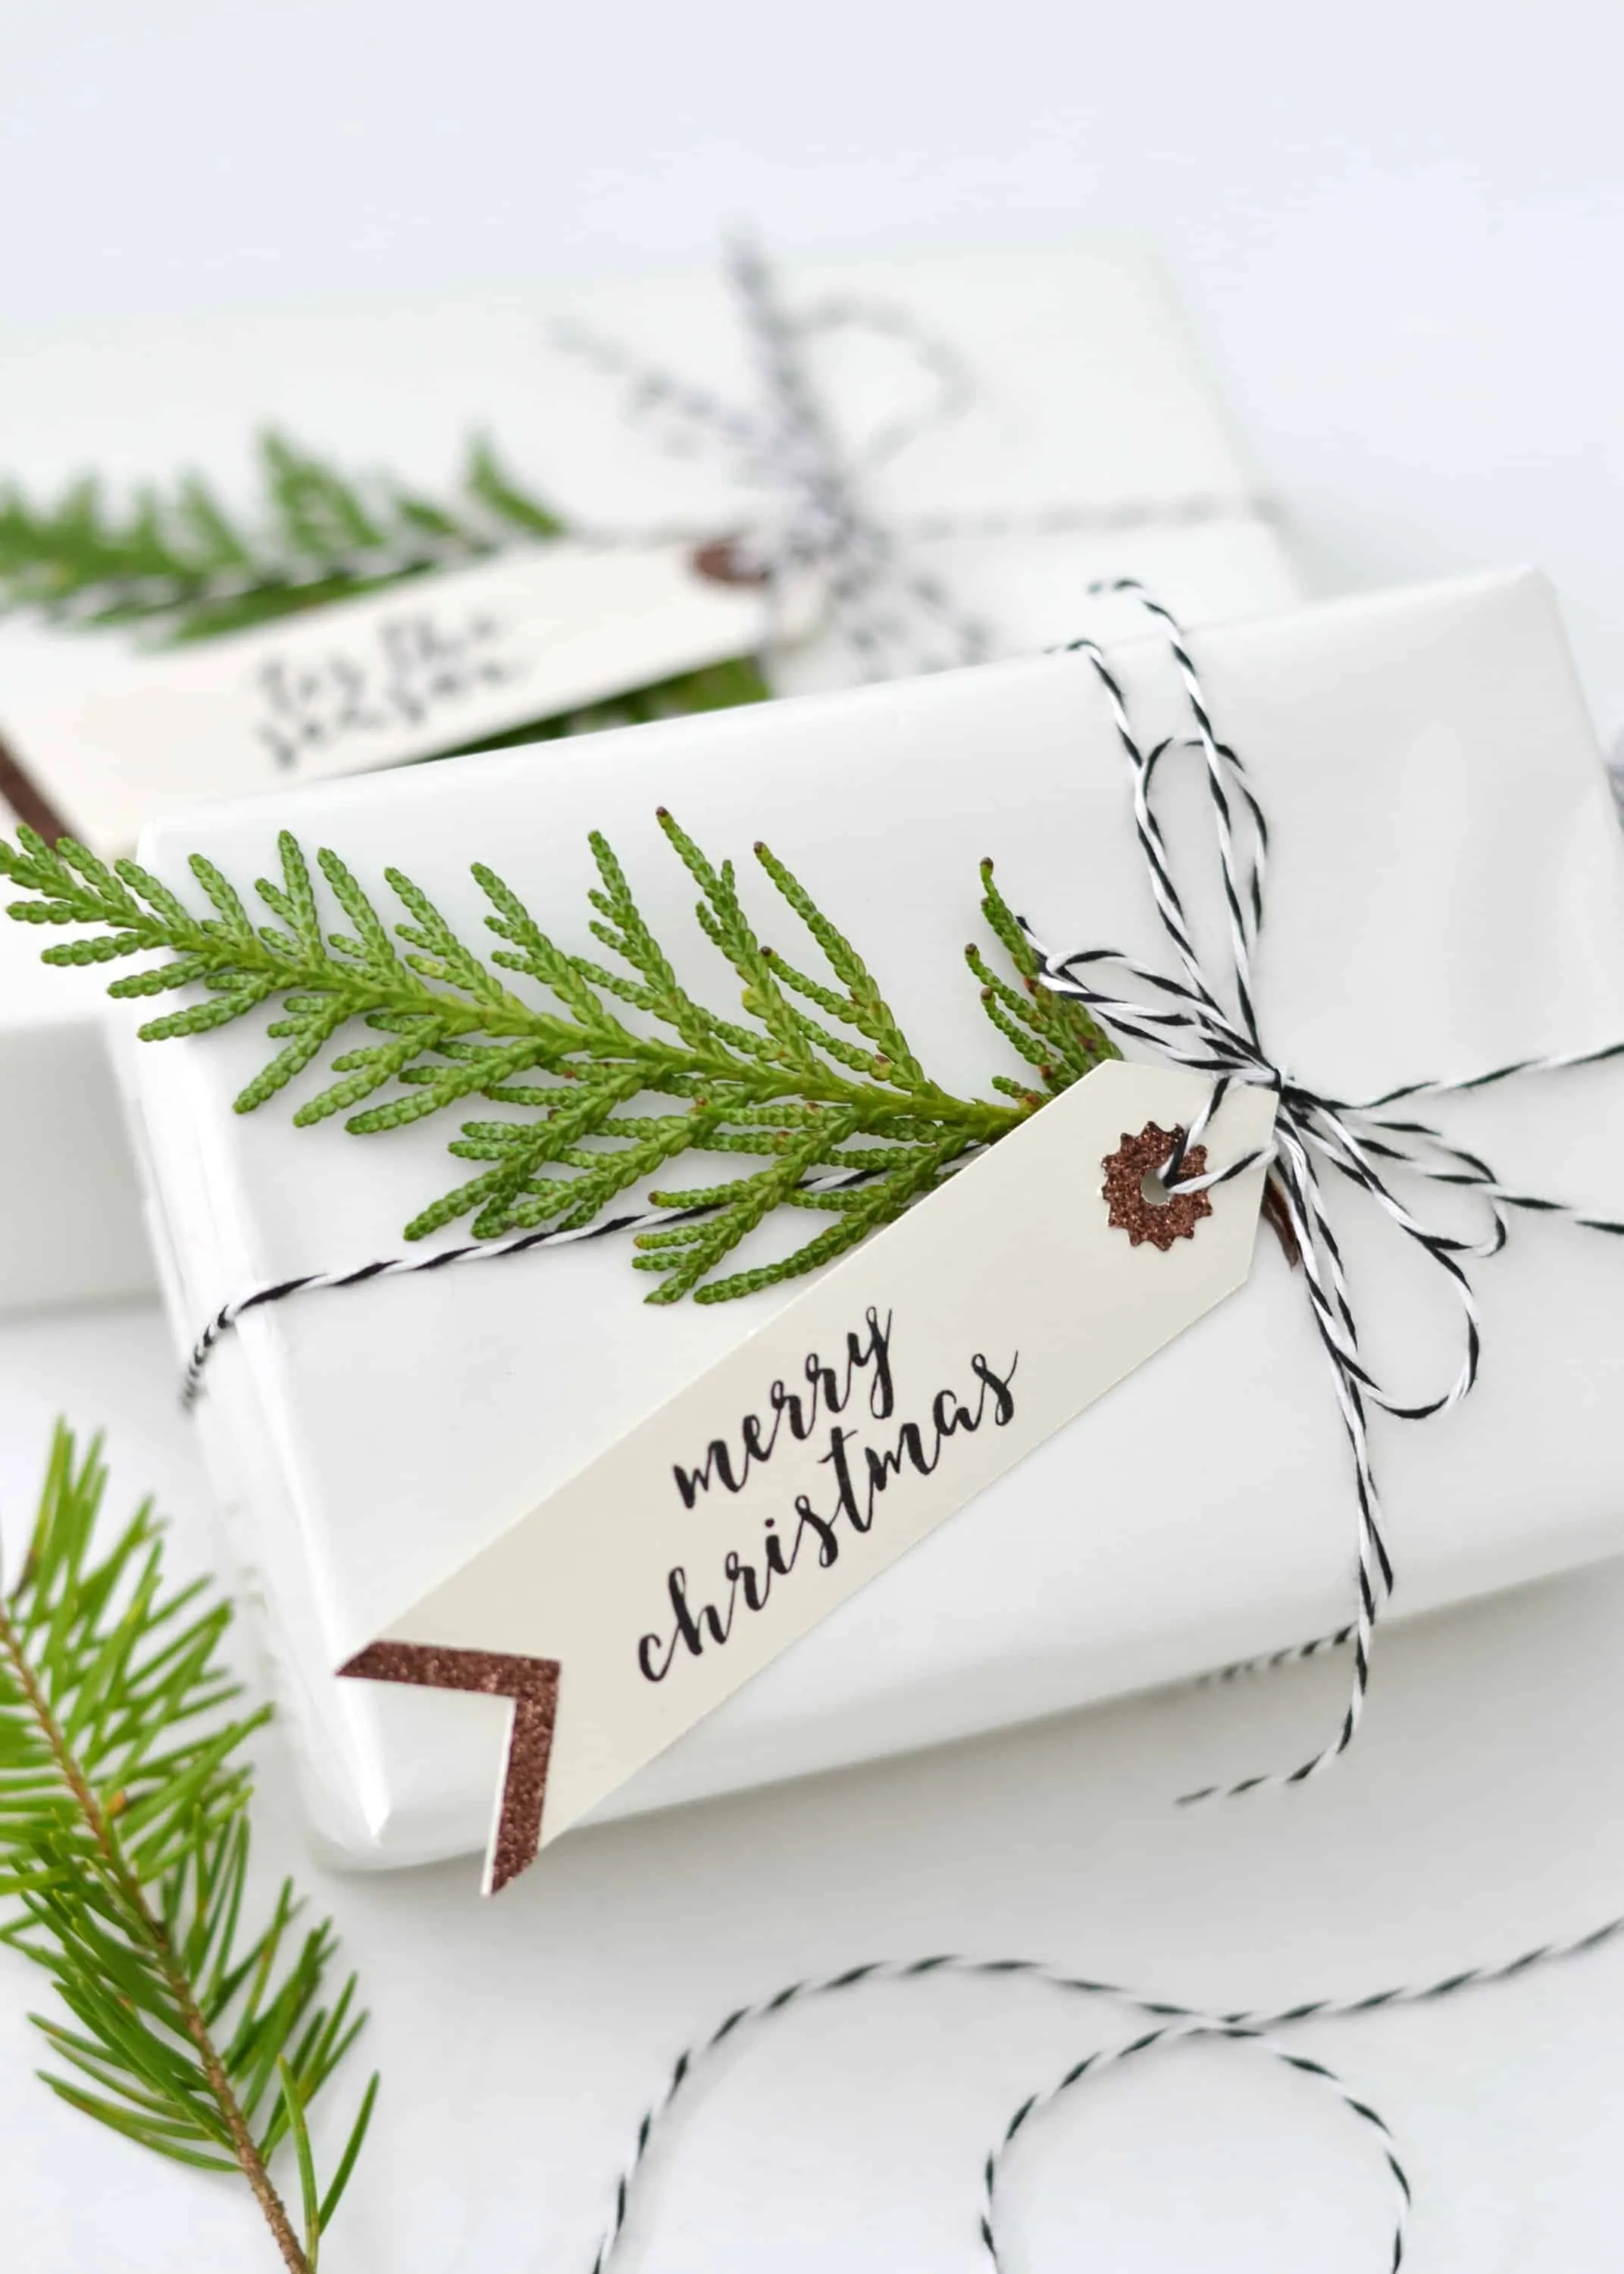 These free printable Christmas tags are the perfect finishing touch to your Christmas packages this year! These tags were hand painted just for Boxwood Avenue readers, and I am so excited to share them with you!